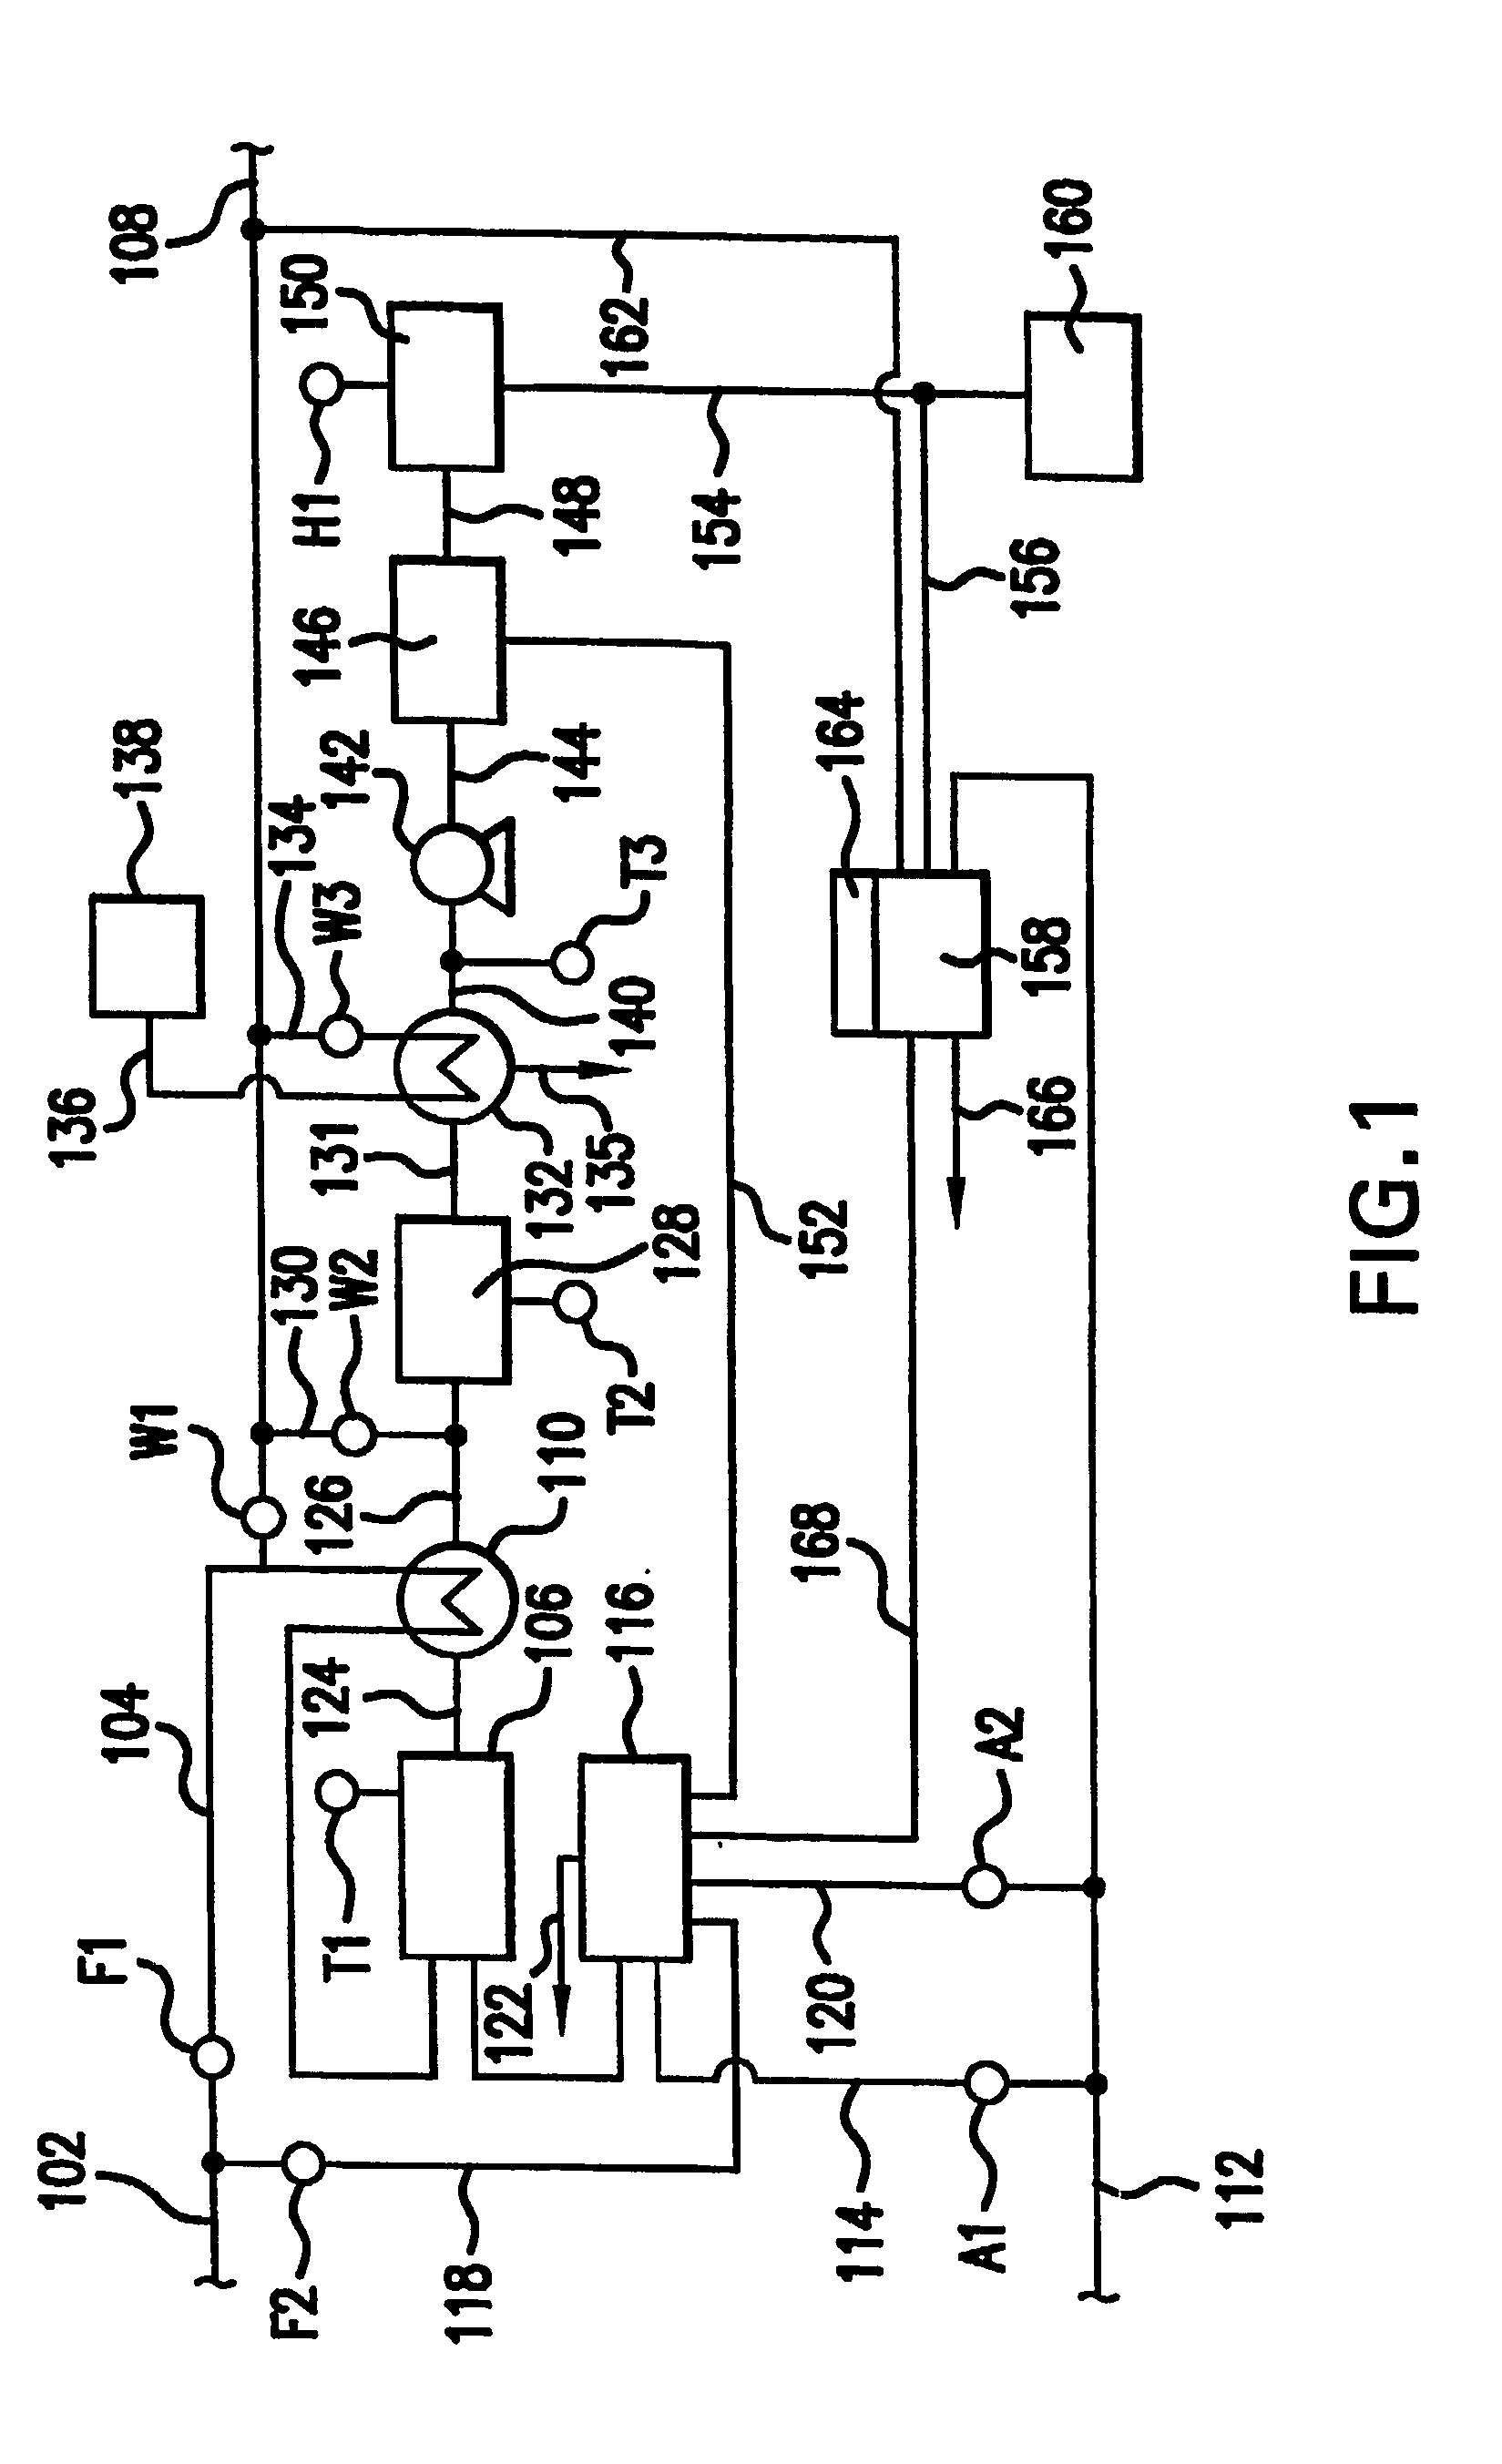 Method for operating a hydrogen generator